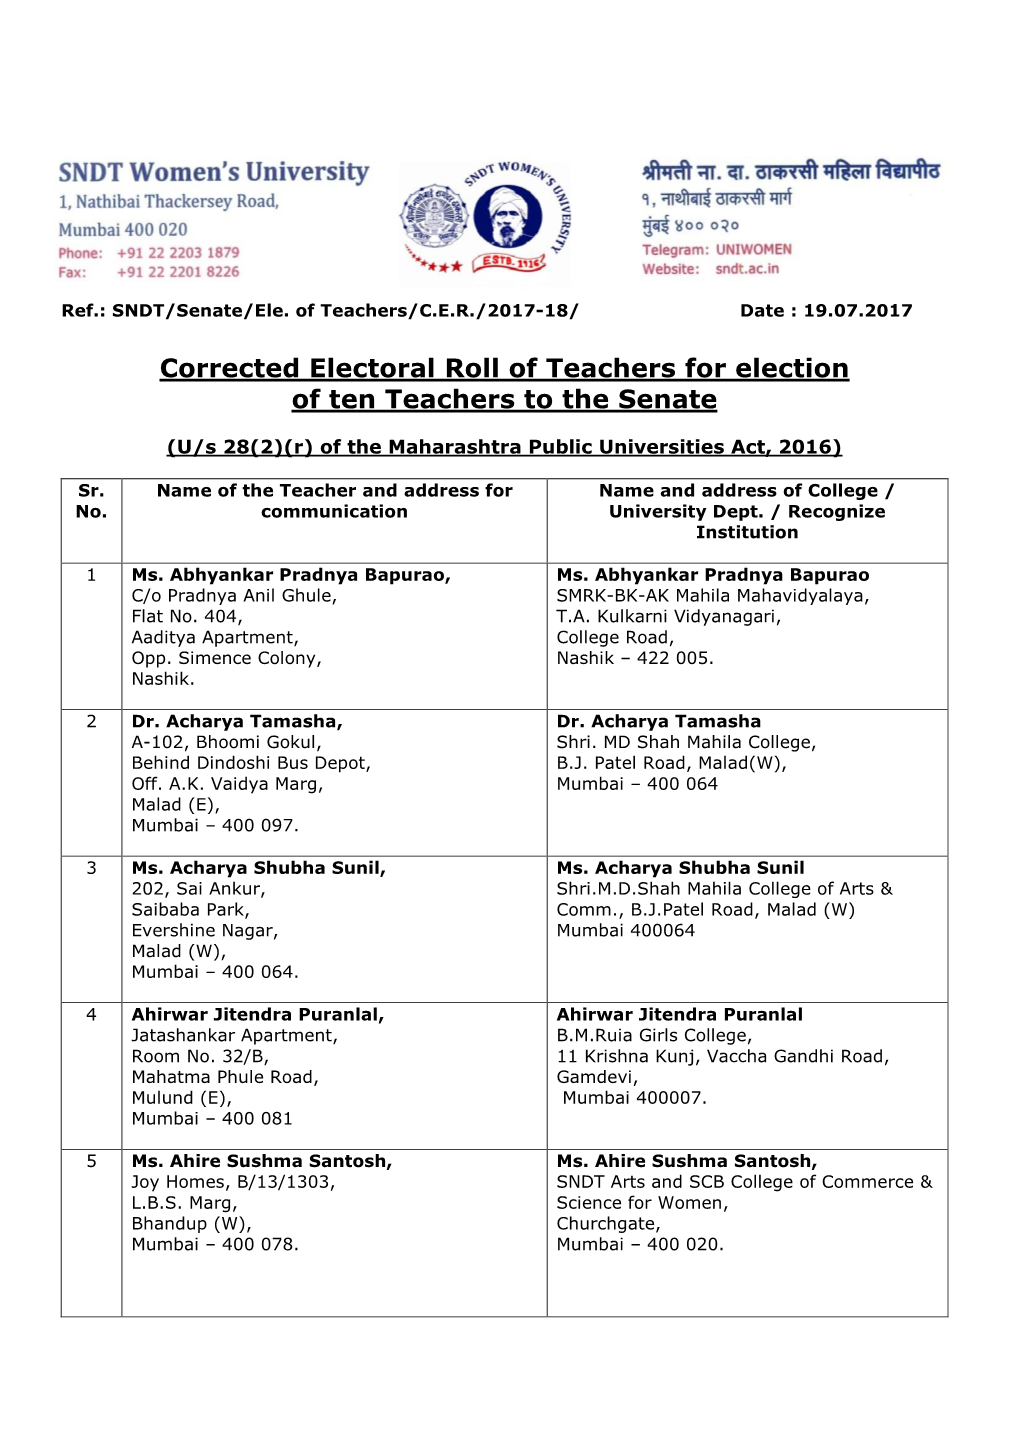 Corrected Electoral Roll of Teachers for Election of Ten Teachers to the Senate